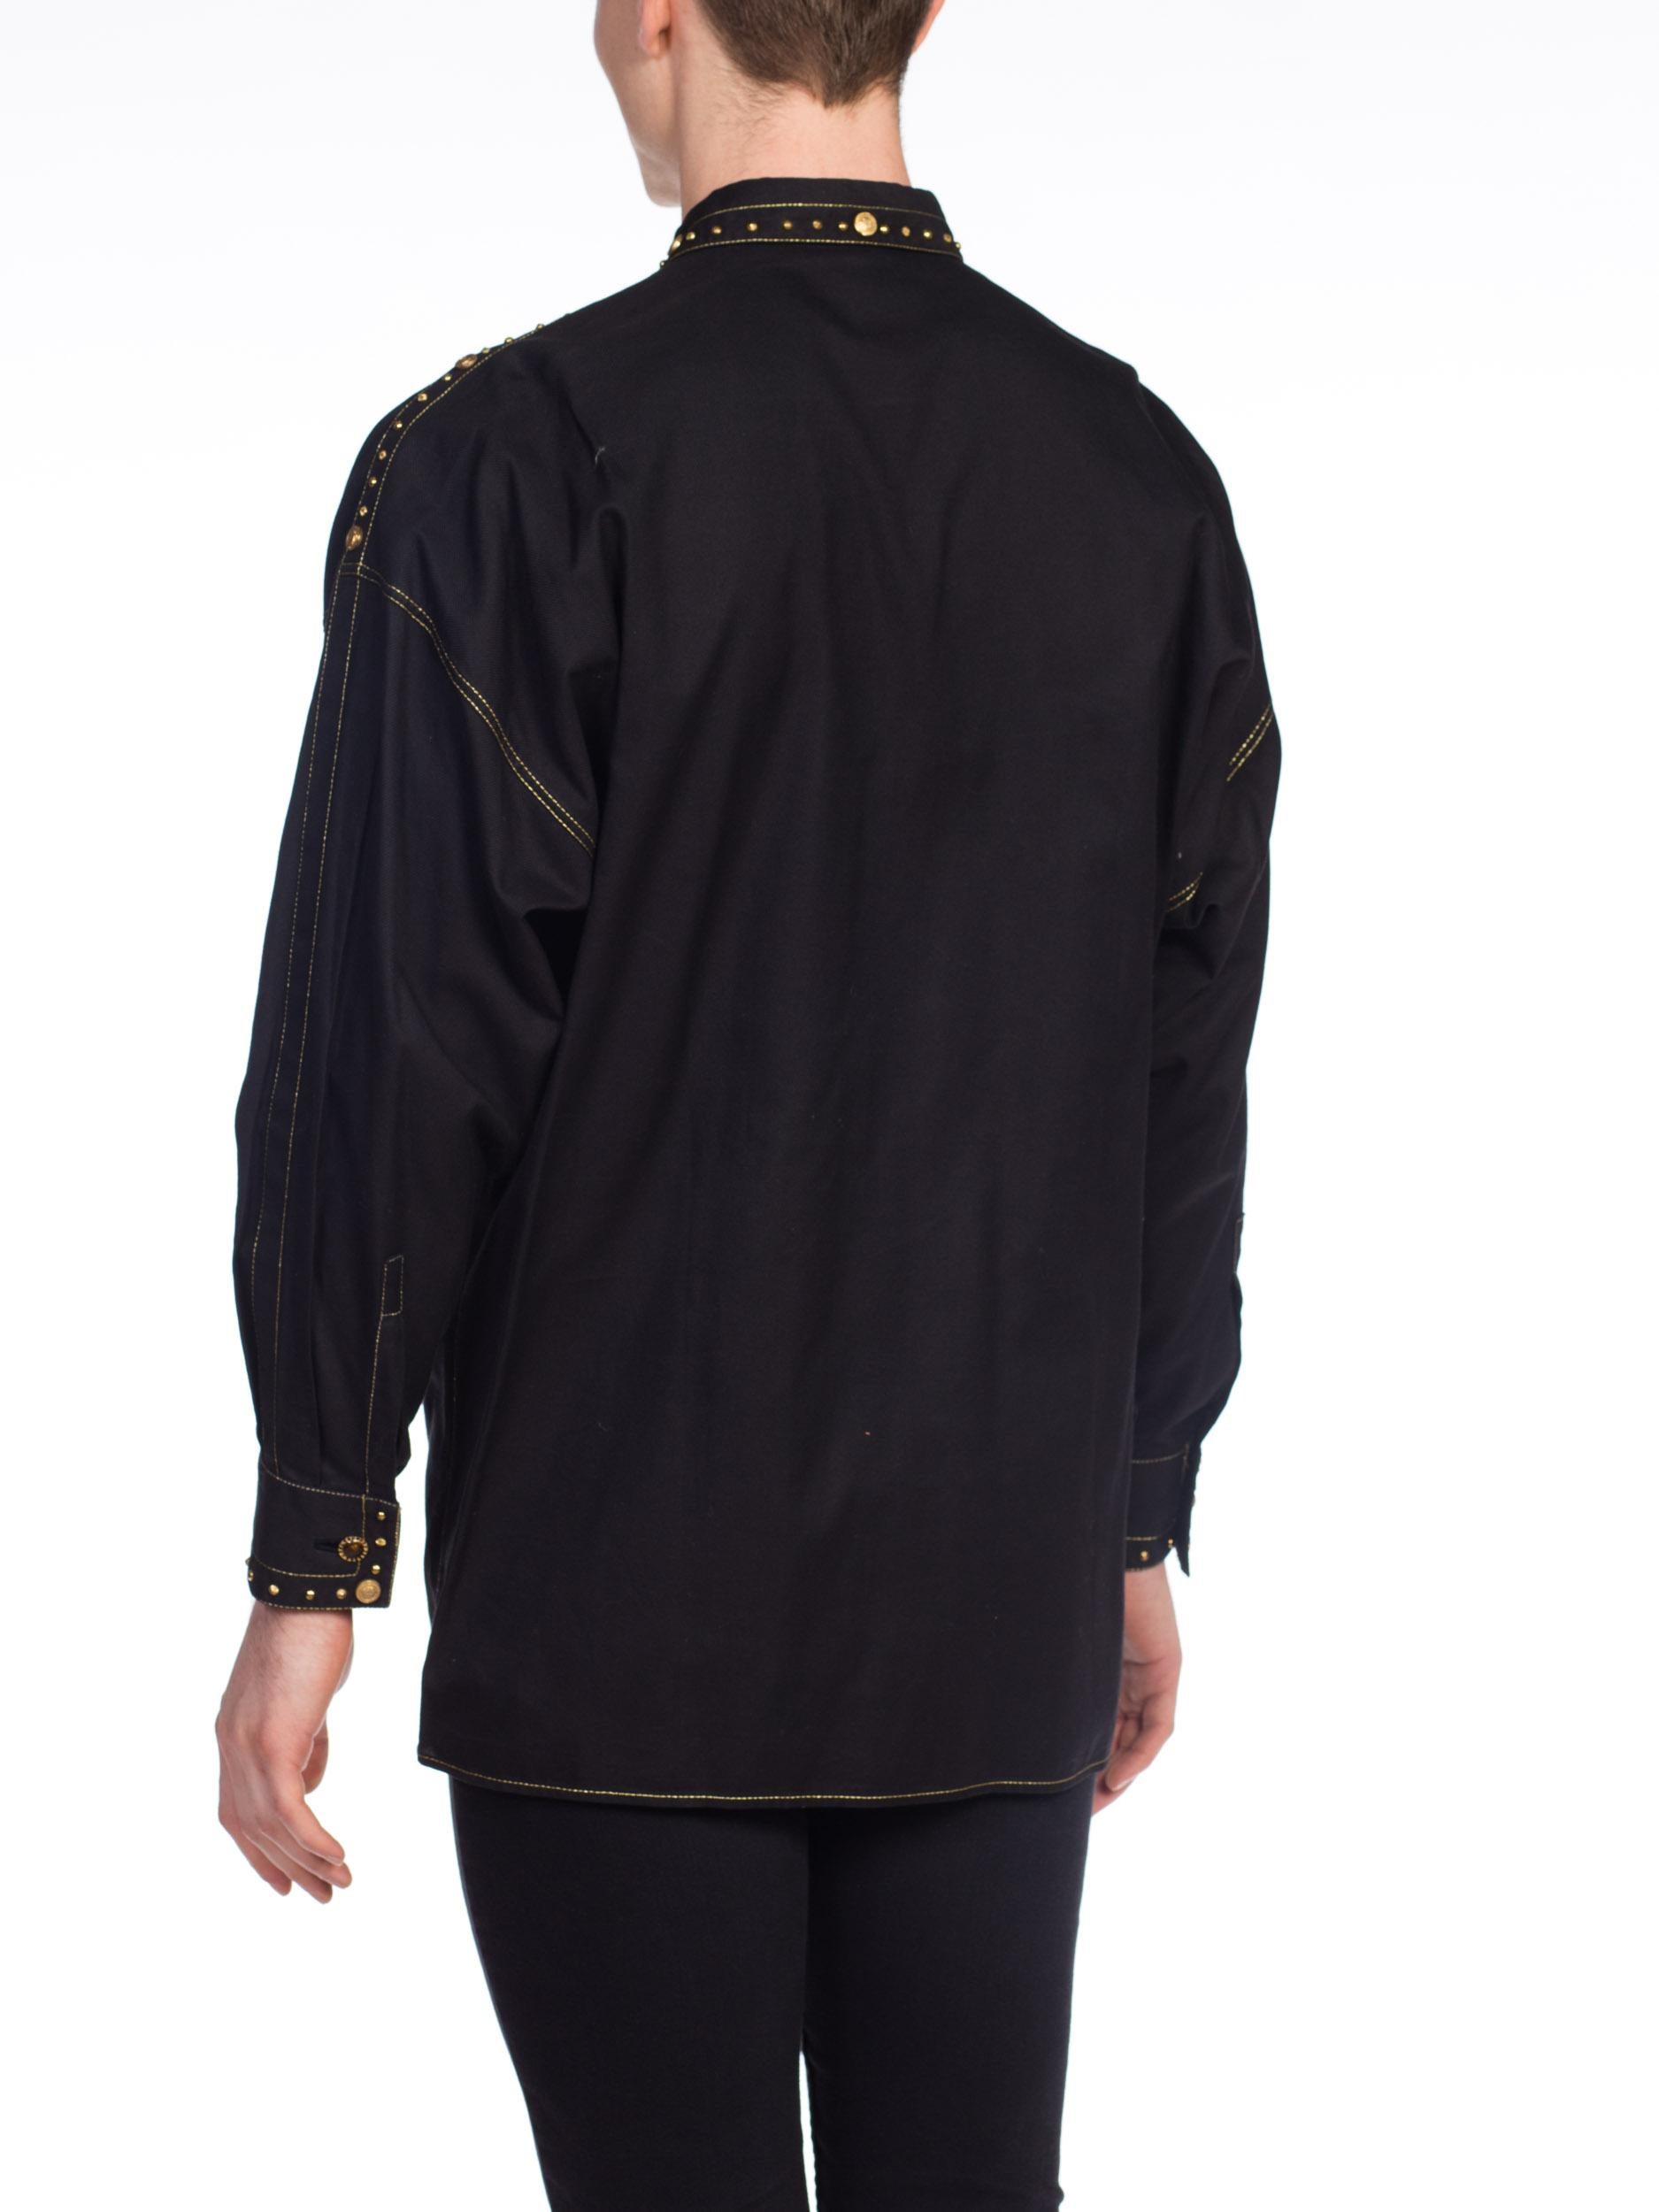 1990S GIANNI VERSACE Men's Shirt With Gold Medusa Studs & Metallic Embroidery 1